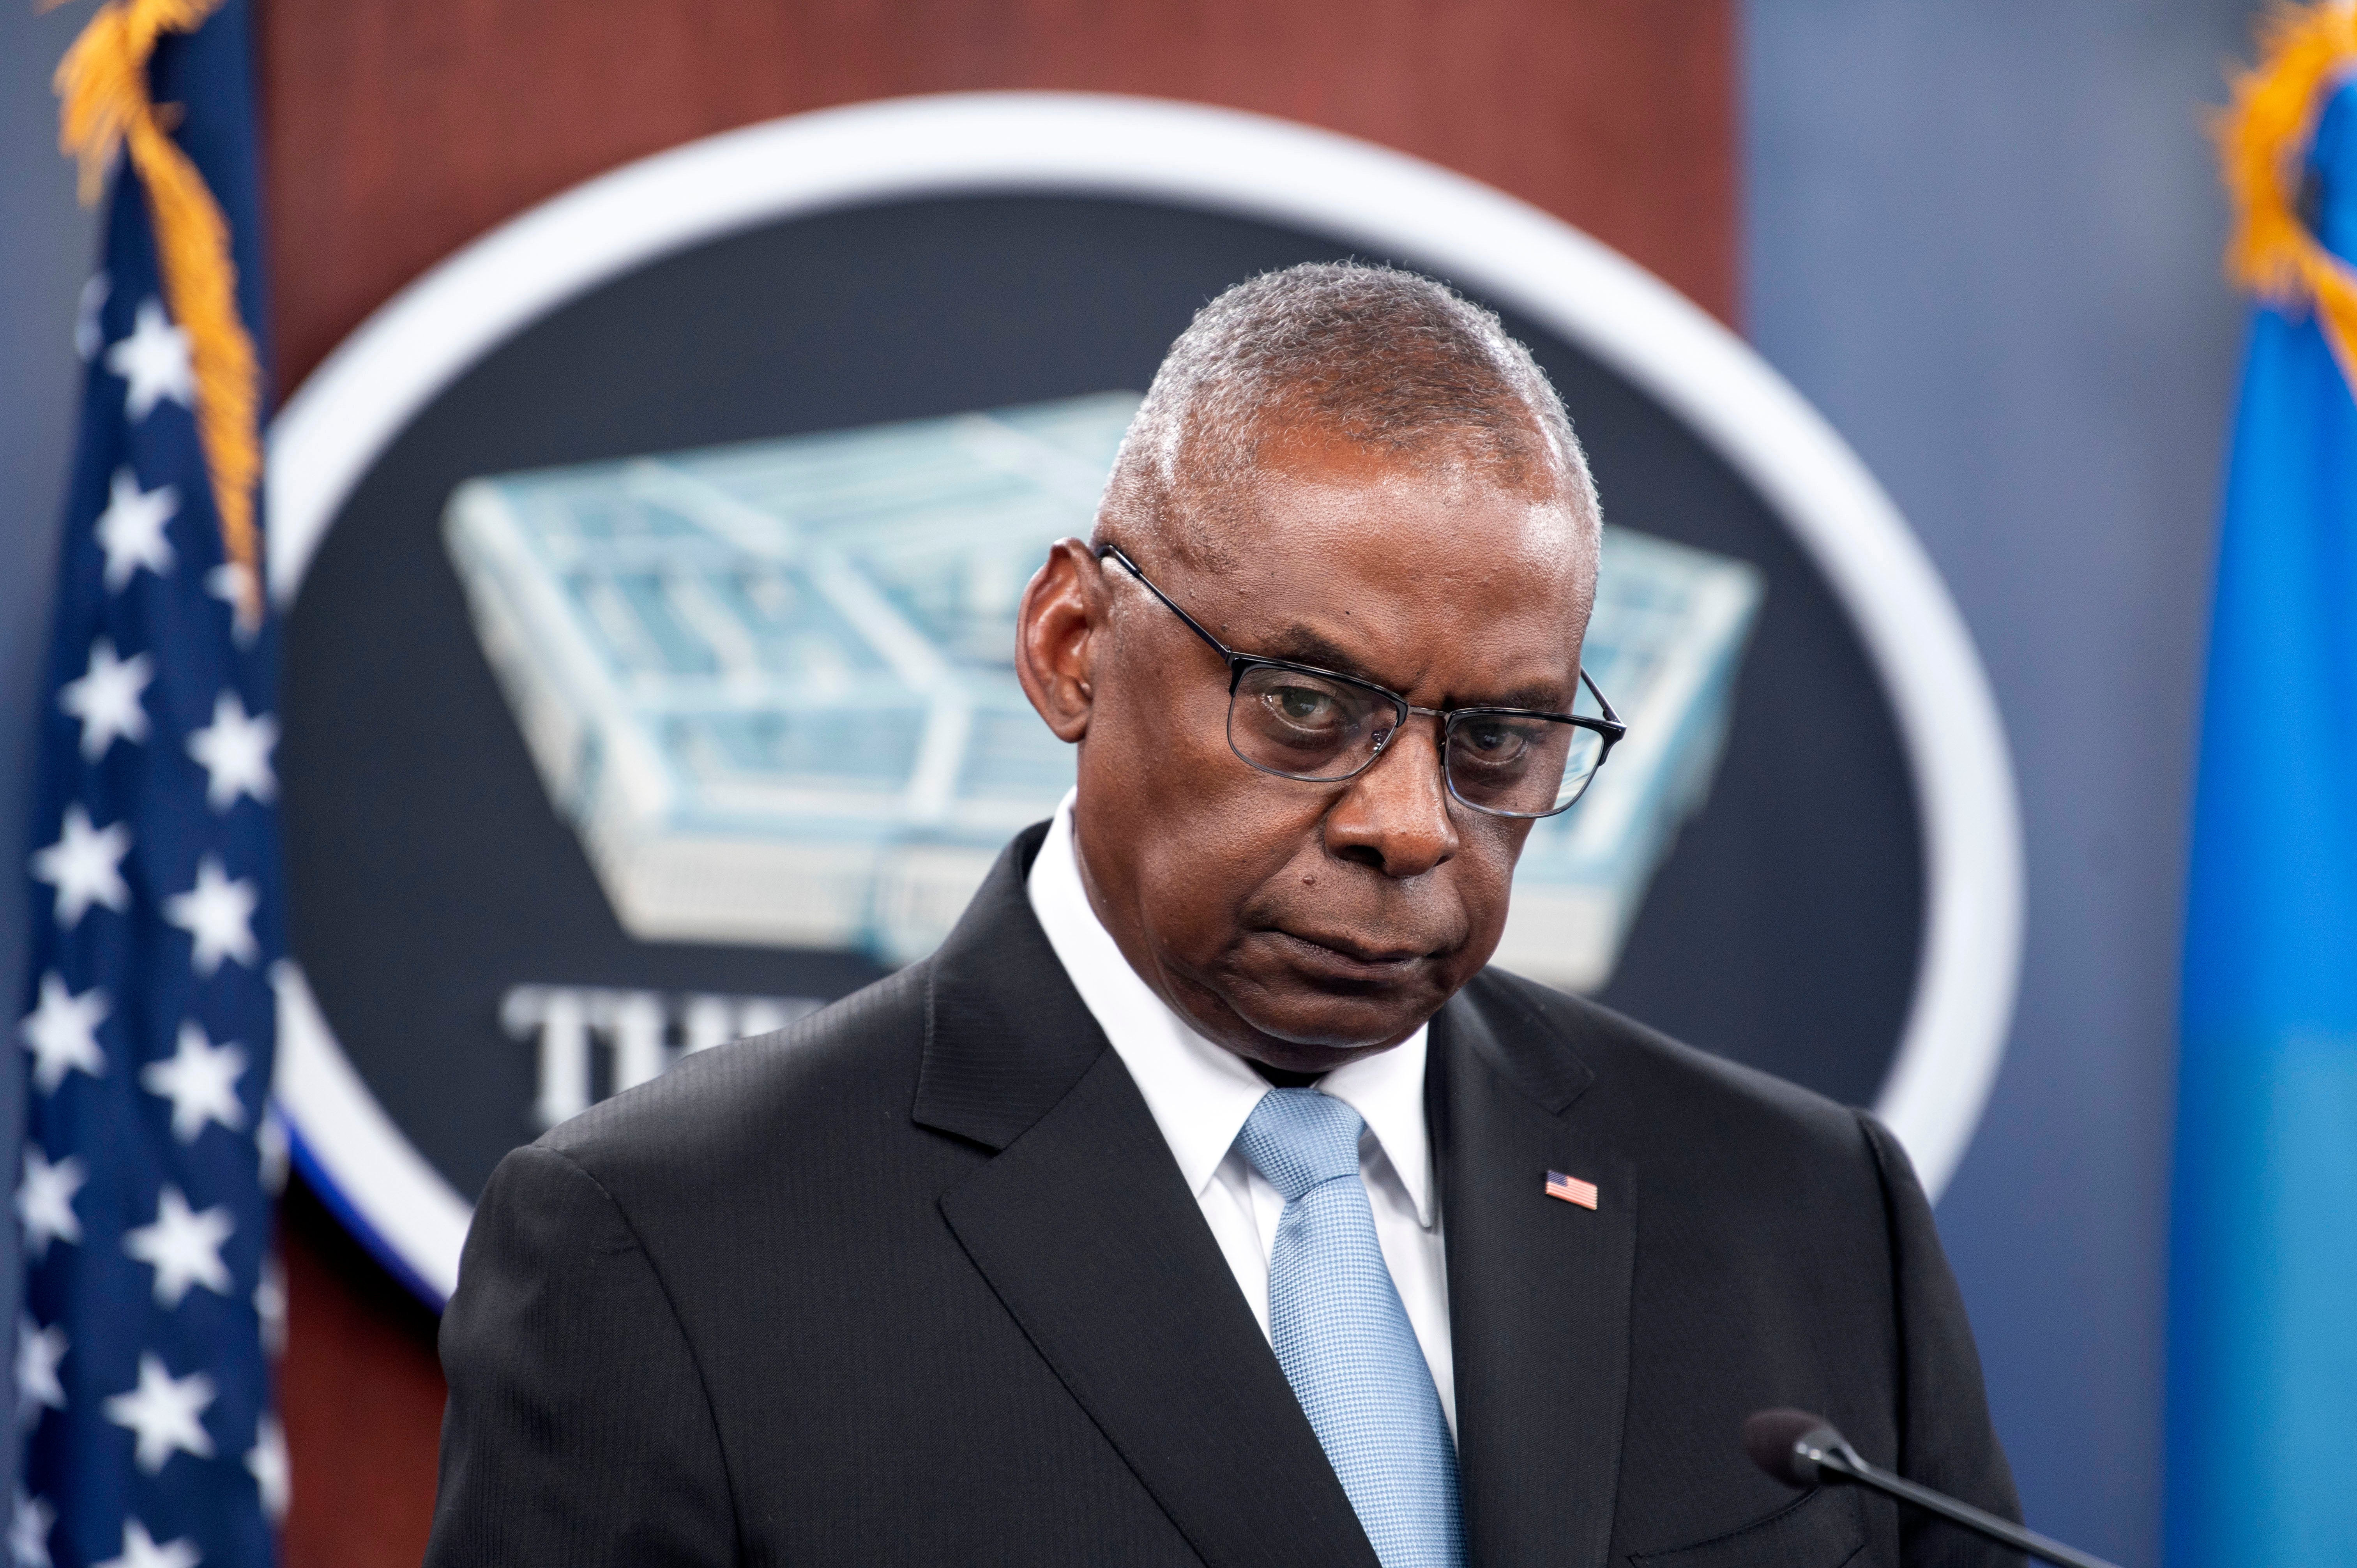 Defense Secretary Lloyd Austin speaks during a press briefing at the Pentagon on May 20